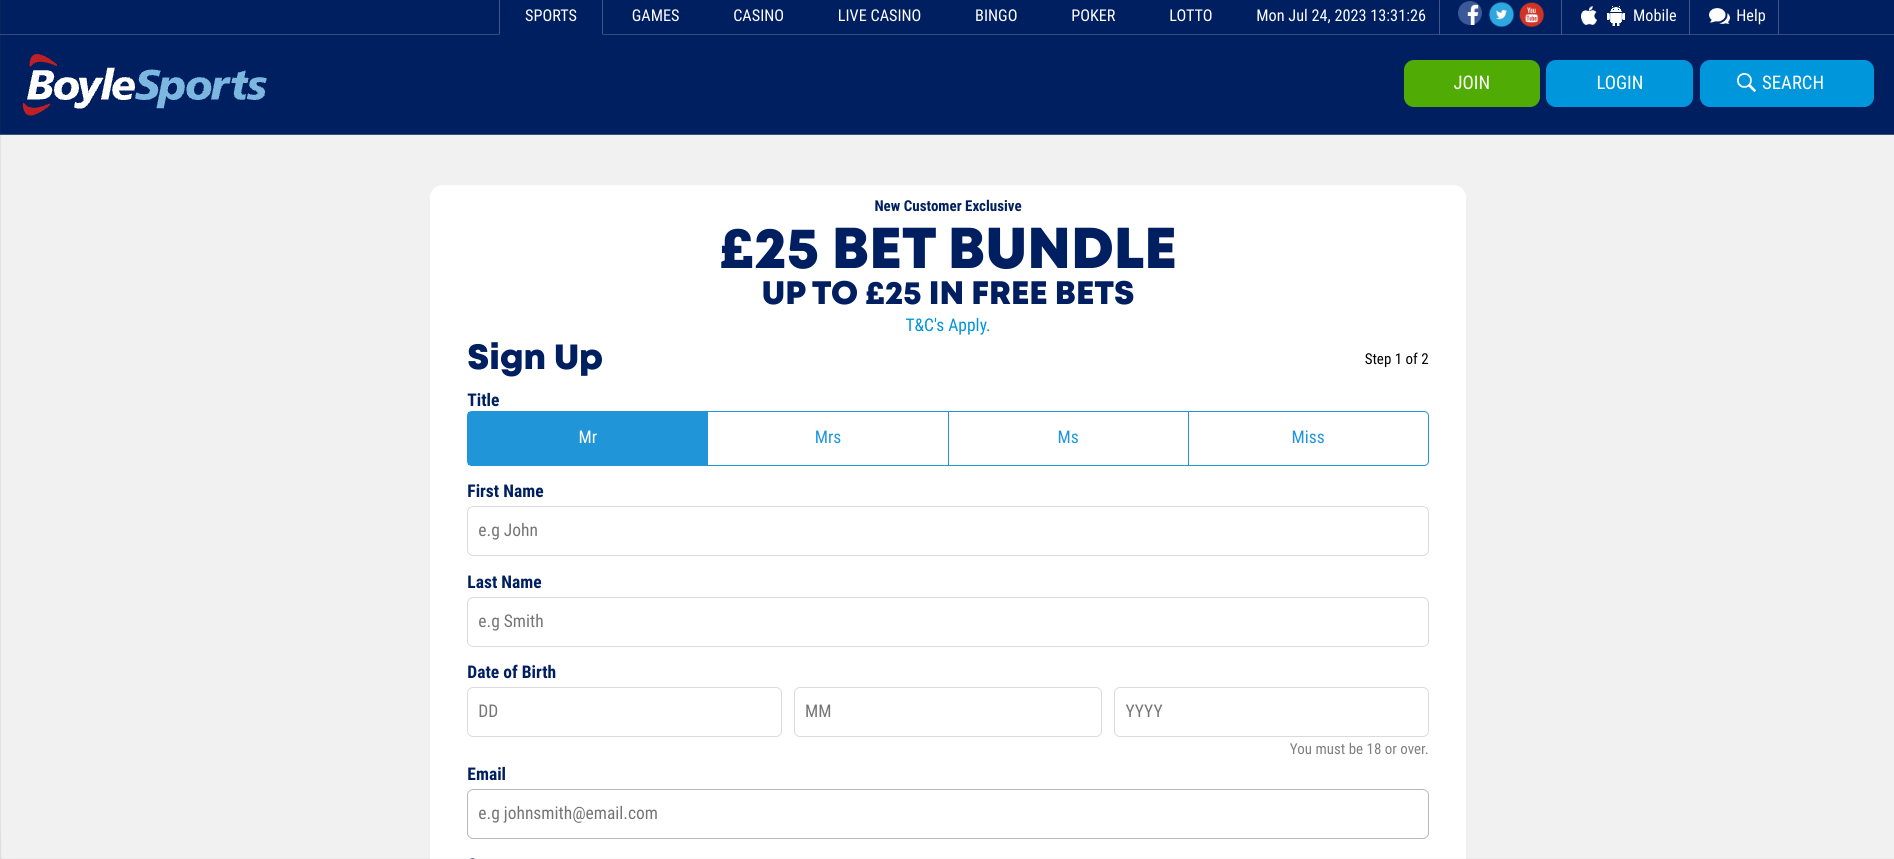 How to Claim Free Bets: BoyleSports